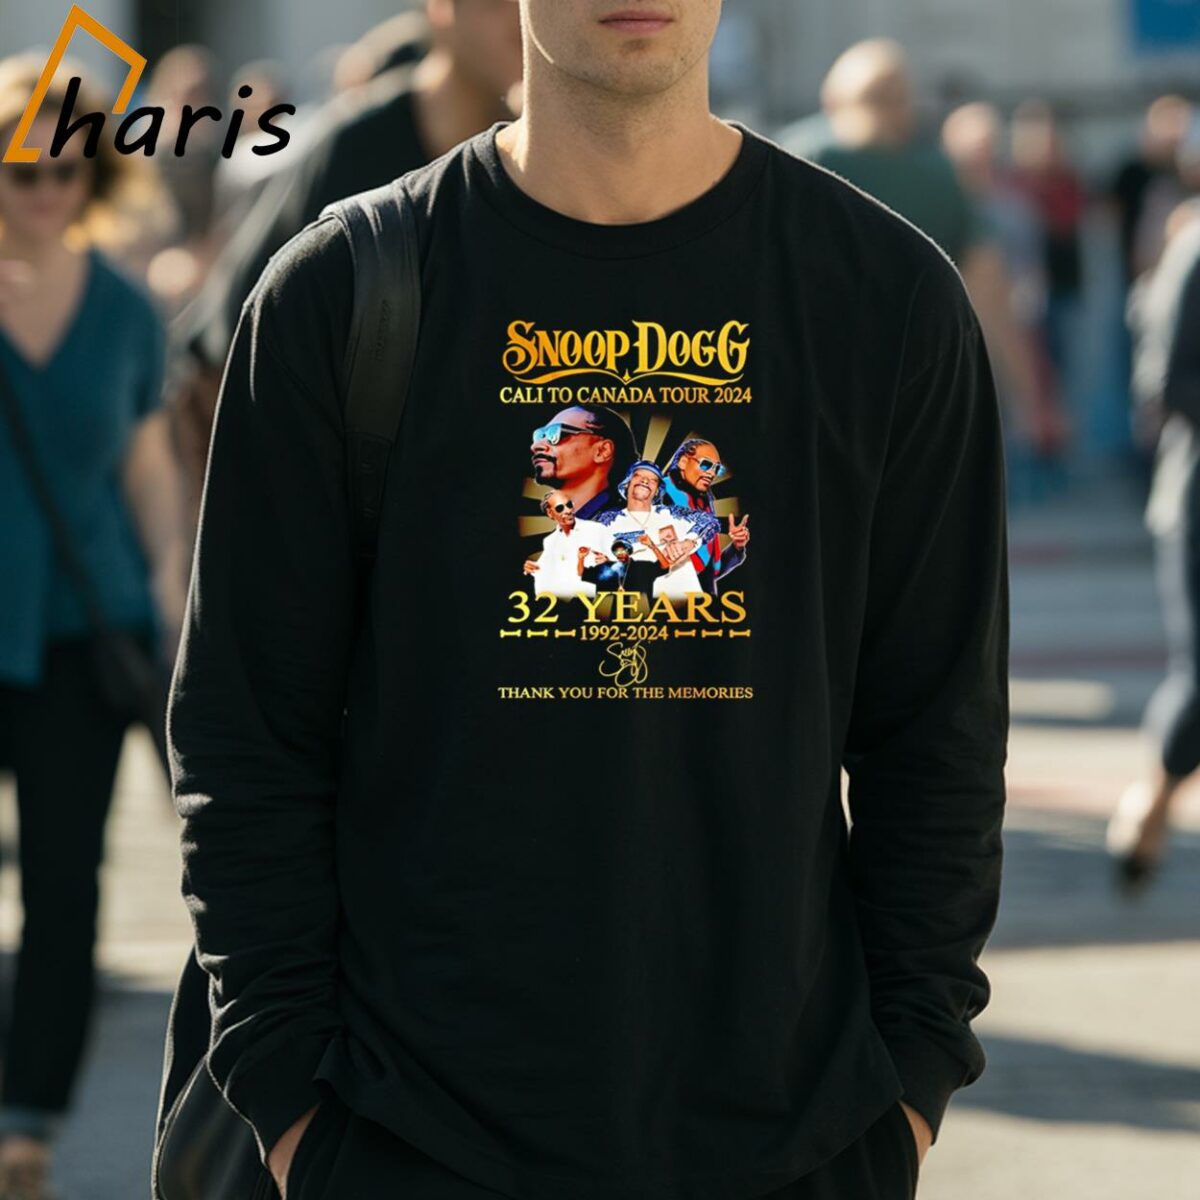 Snoop Dogg Cali To Canada Tour 2024 32 Years 1992 2024 Thank You For The Memories Shirt 3 Long Sleeve Shirt